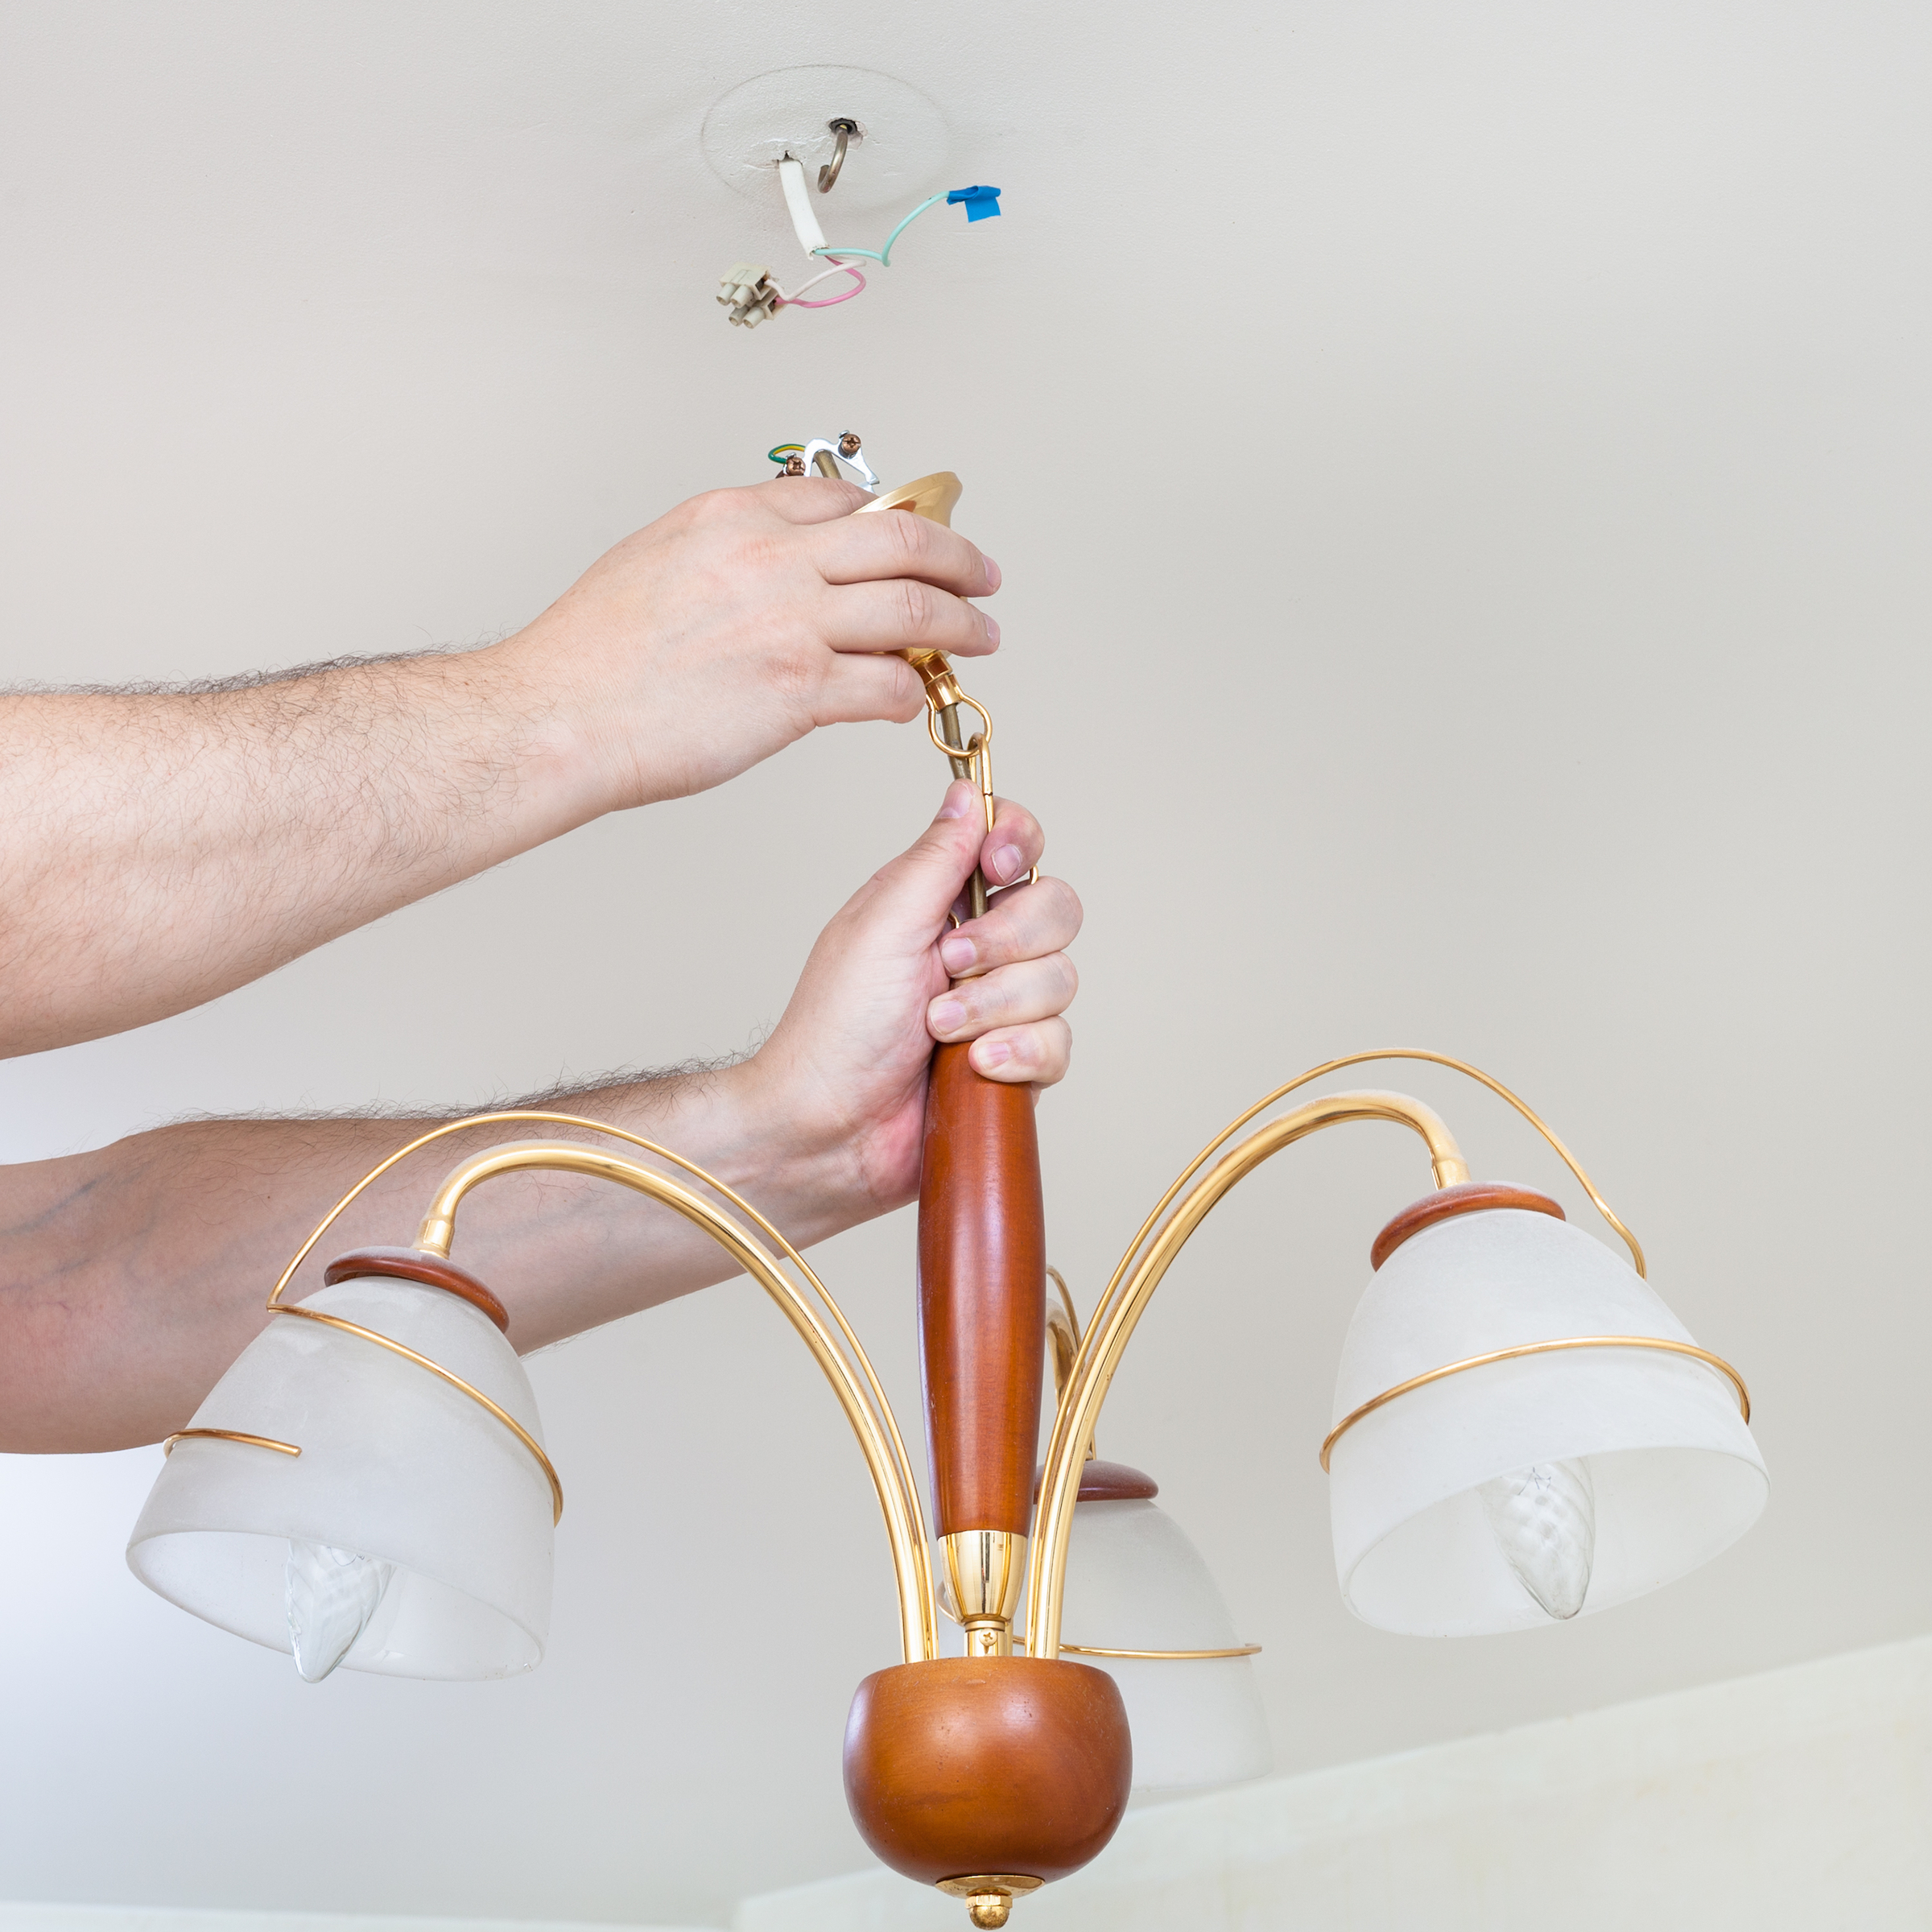 How To Easily Replace Or Install A New Light Fixture